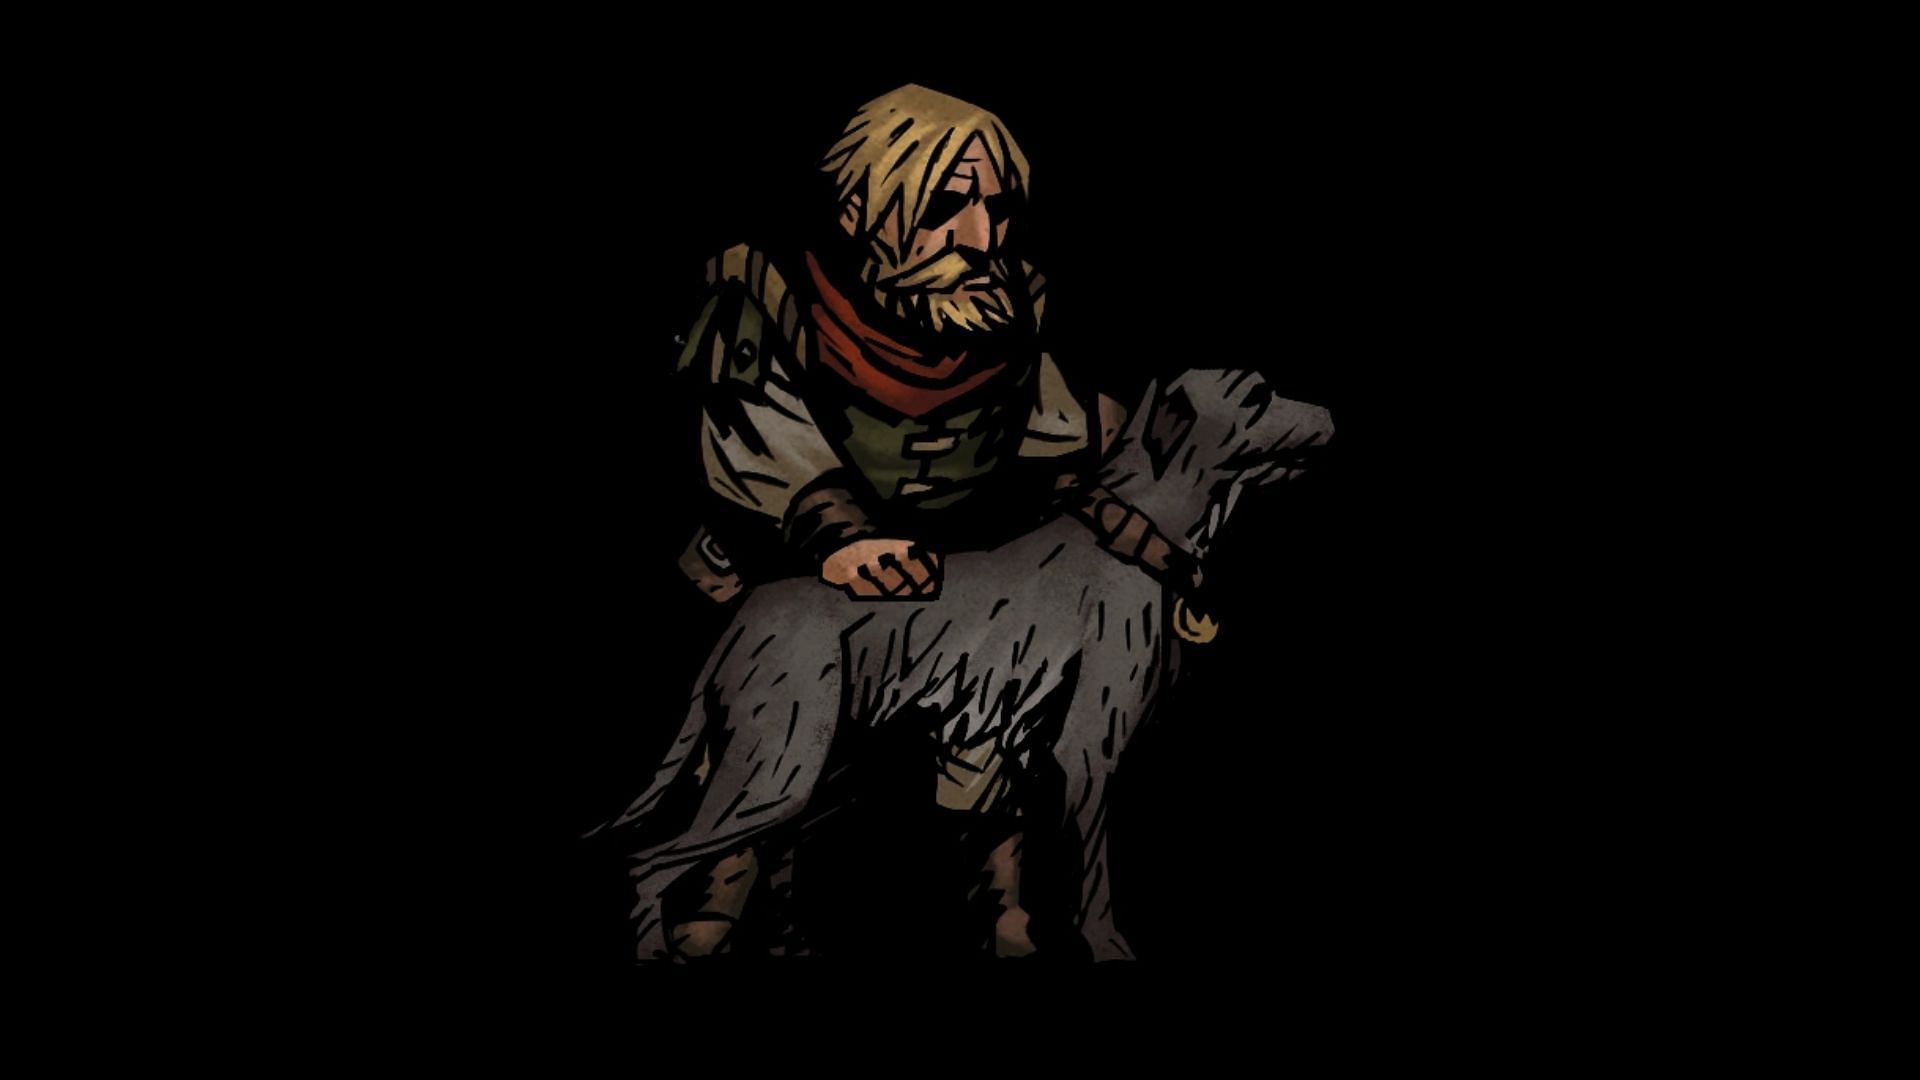 The WolfHound and its Master (Image via Red Hook Studios)